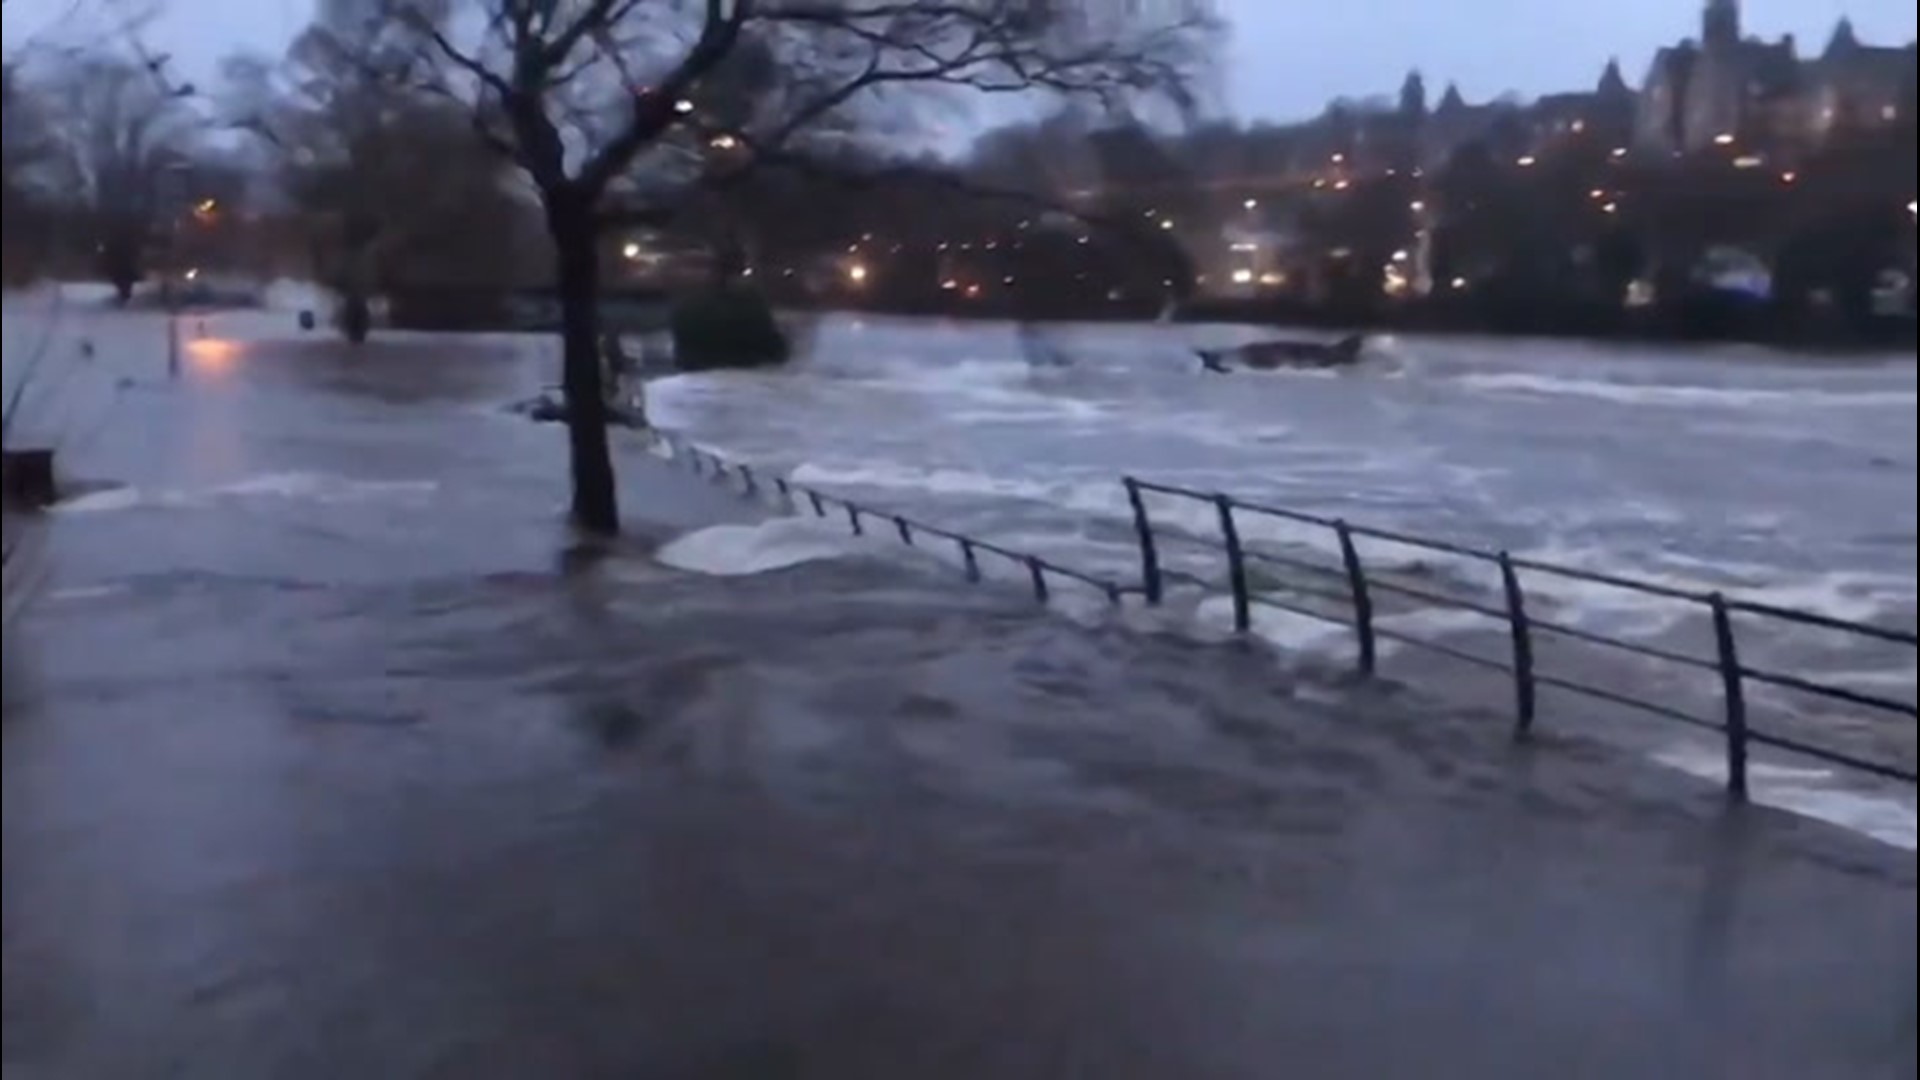 Torrential rain caused flash flooding in Cork, Ireland, on Feb. 24, forcing flood warnings to be issued for the area.